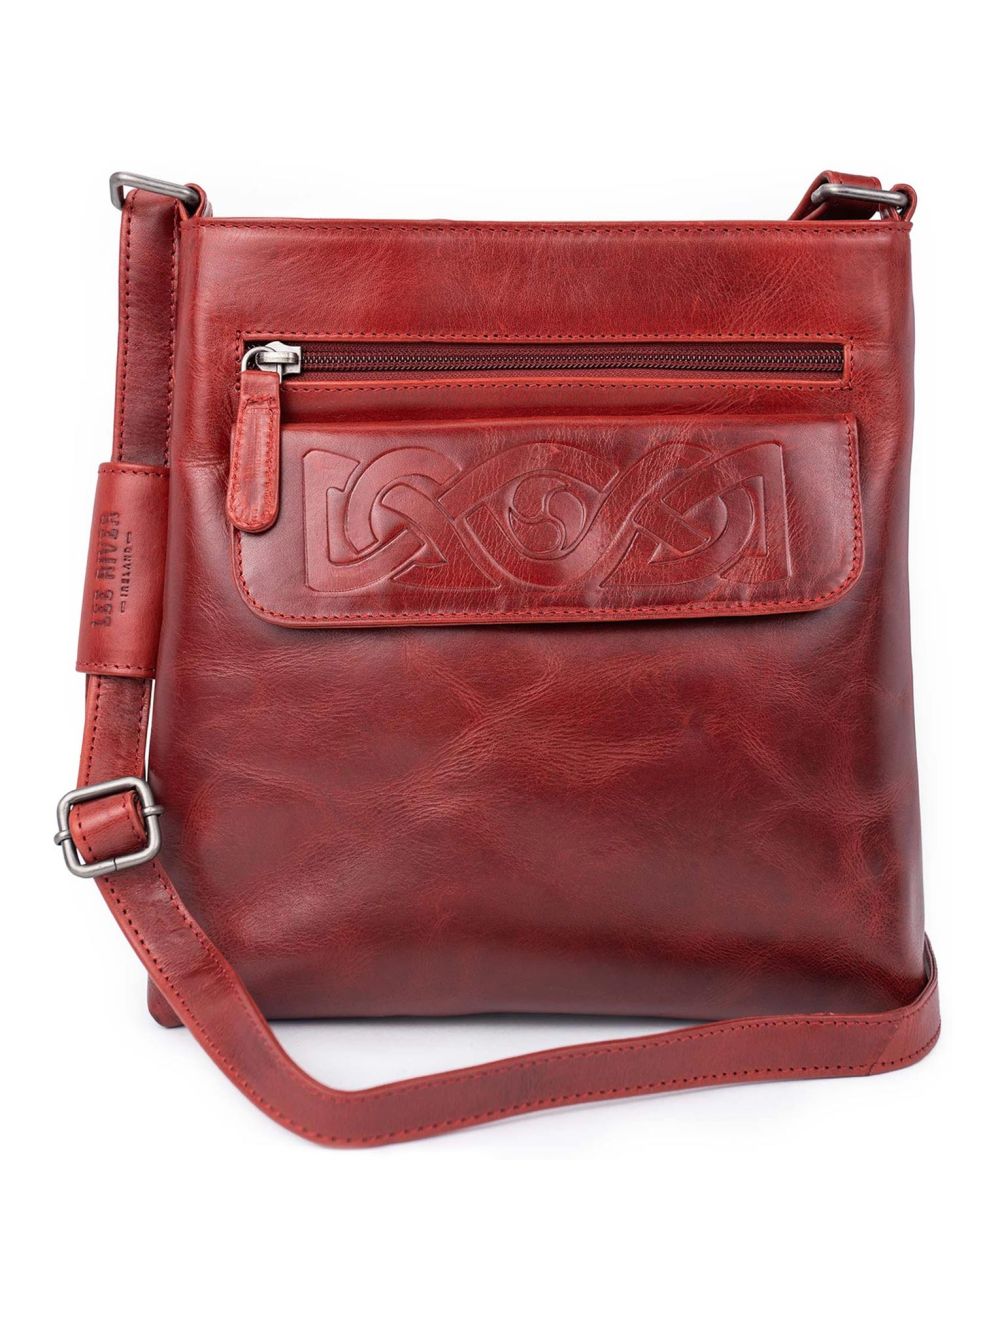 Nwot Not Rational Eugenia Hobo Shoulder leather crossbody bag | Red leather  handbags, Red leather bag, Purses crossbody